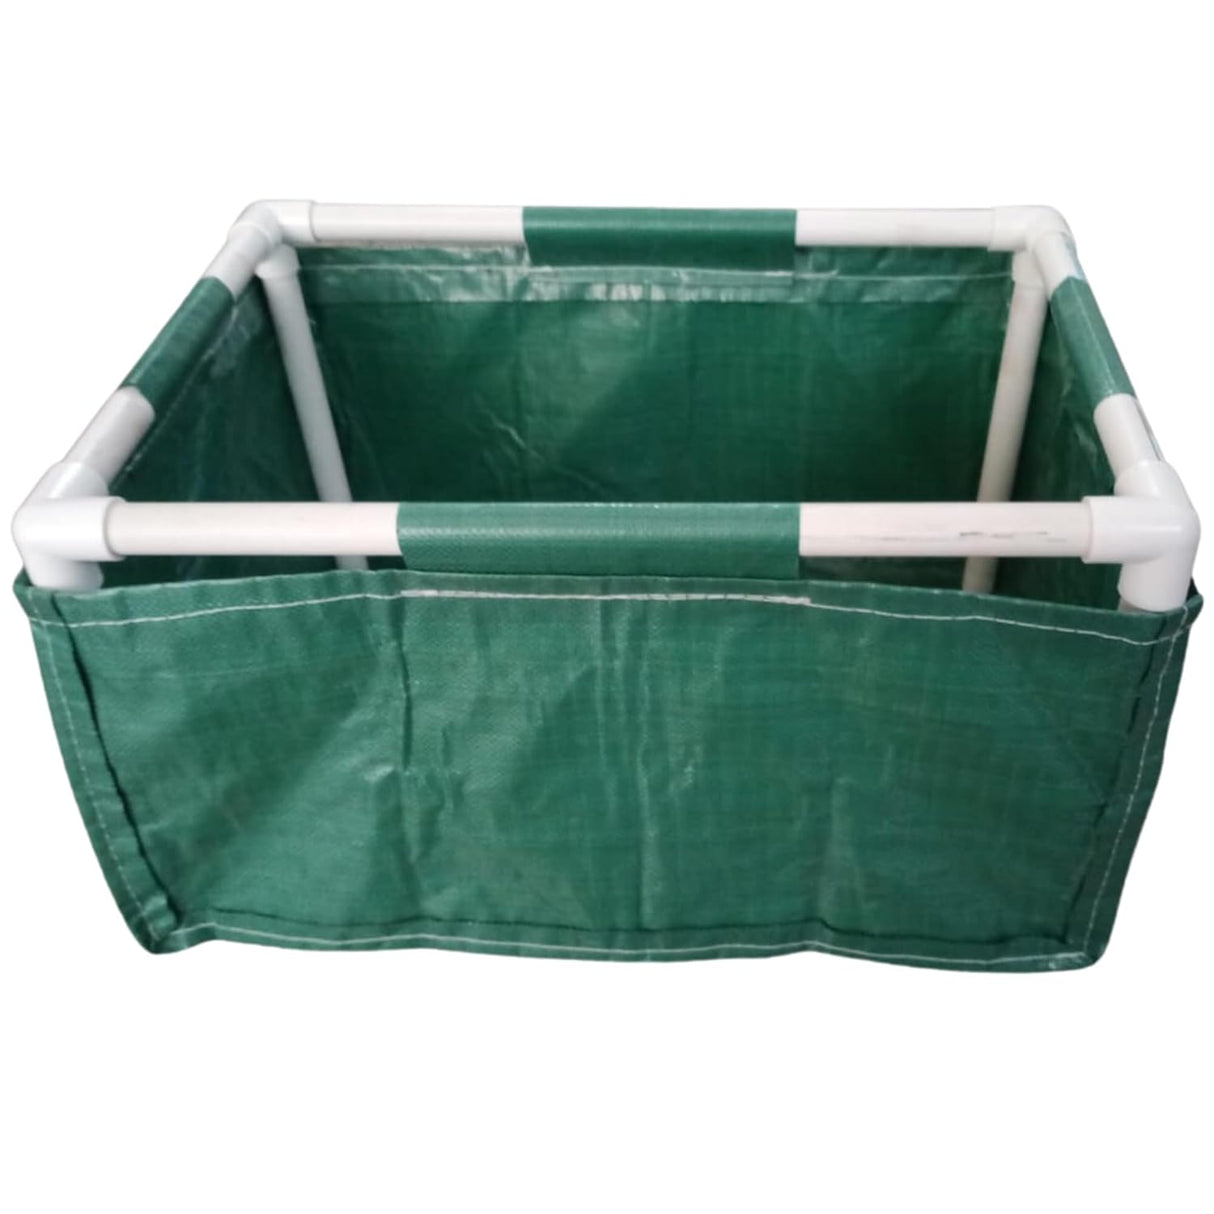 SINGHAL HDPE UV Protected Plants Grow Bags, 2x1.5x1 Ft - Green Color Rectangular, Ideal for Vegetable Terrace Gardening with PVC Pipe Support Pack of 2 (2 x 1.5 x 1 Feet)